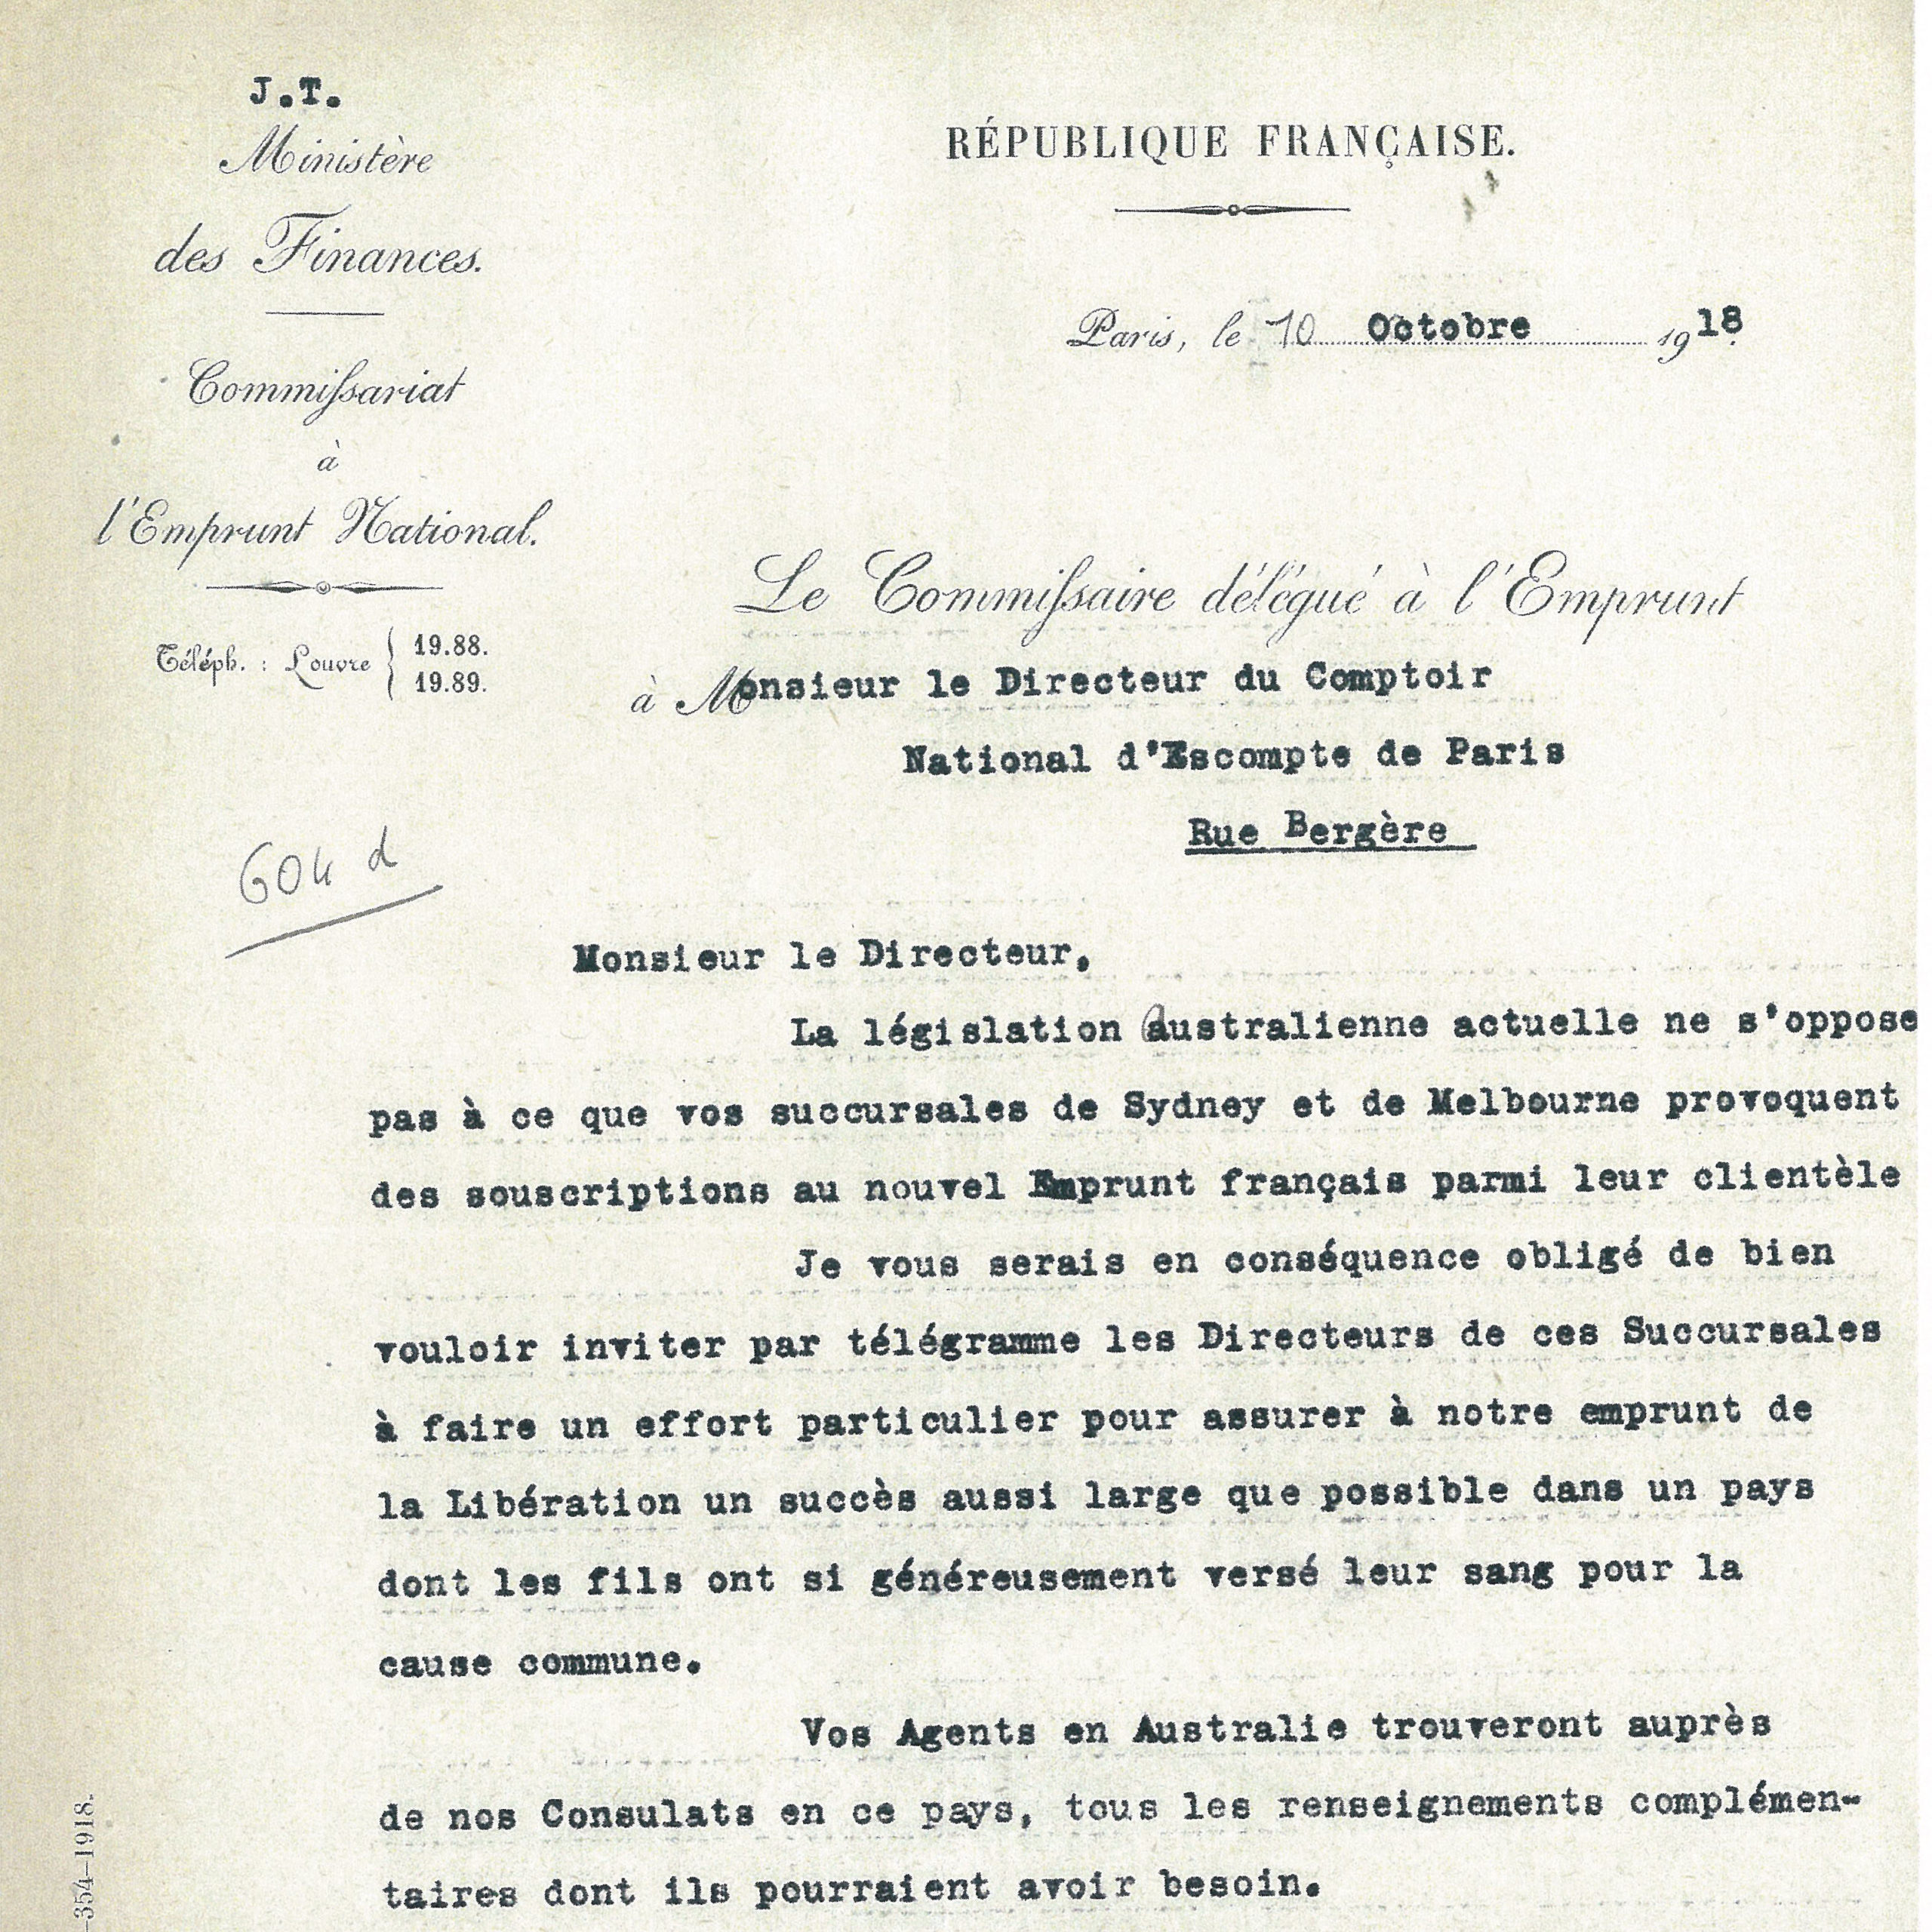 The Ministry of Finance invites the CNEP to promote the loan of 1918 in its major Australian branches